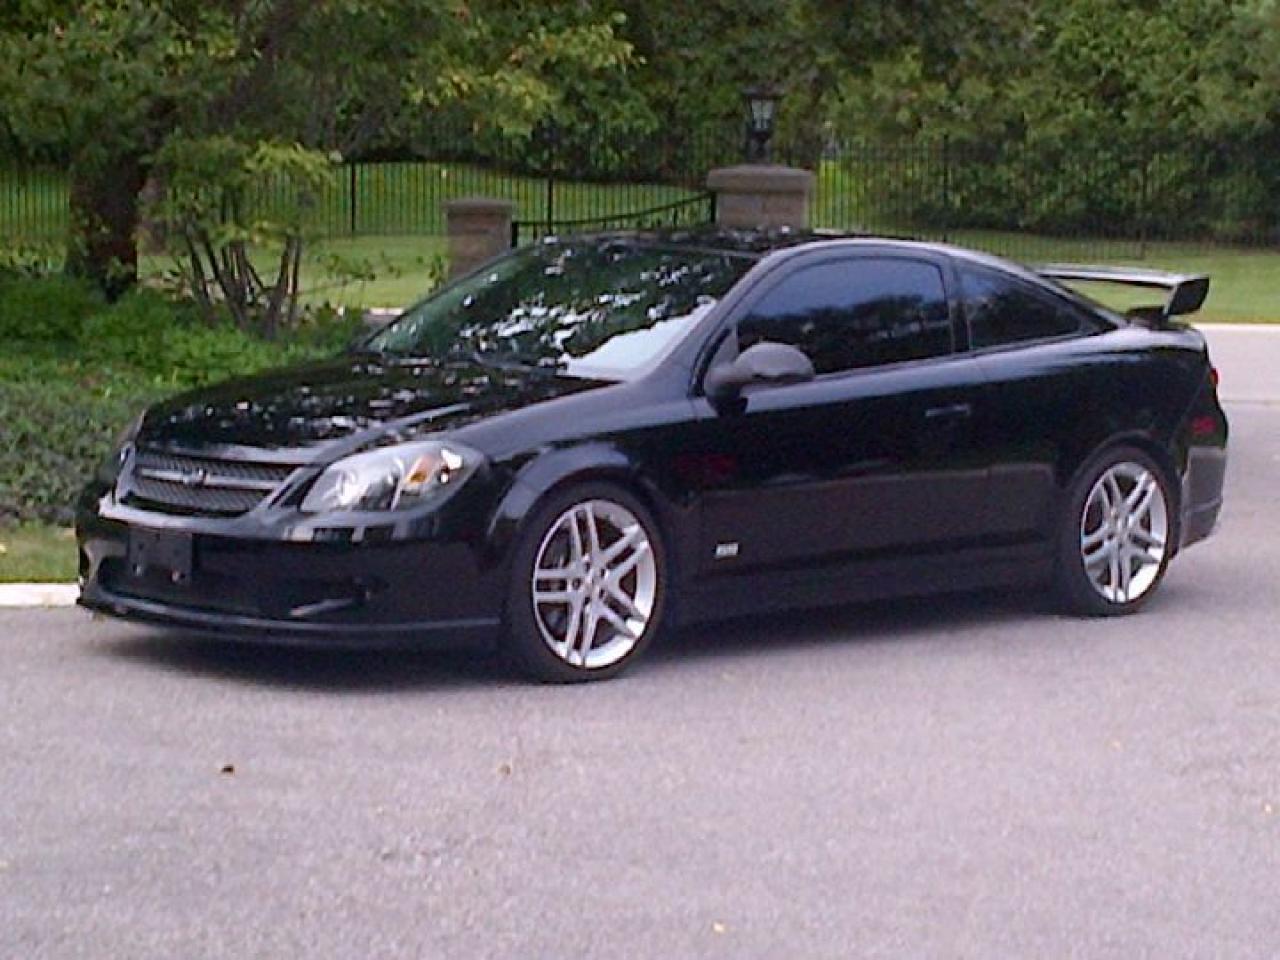 2009 Chevrolet Cobalt Ss Turbocharged For Sale In Toronto